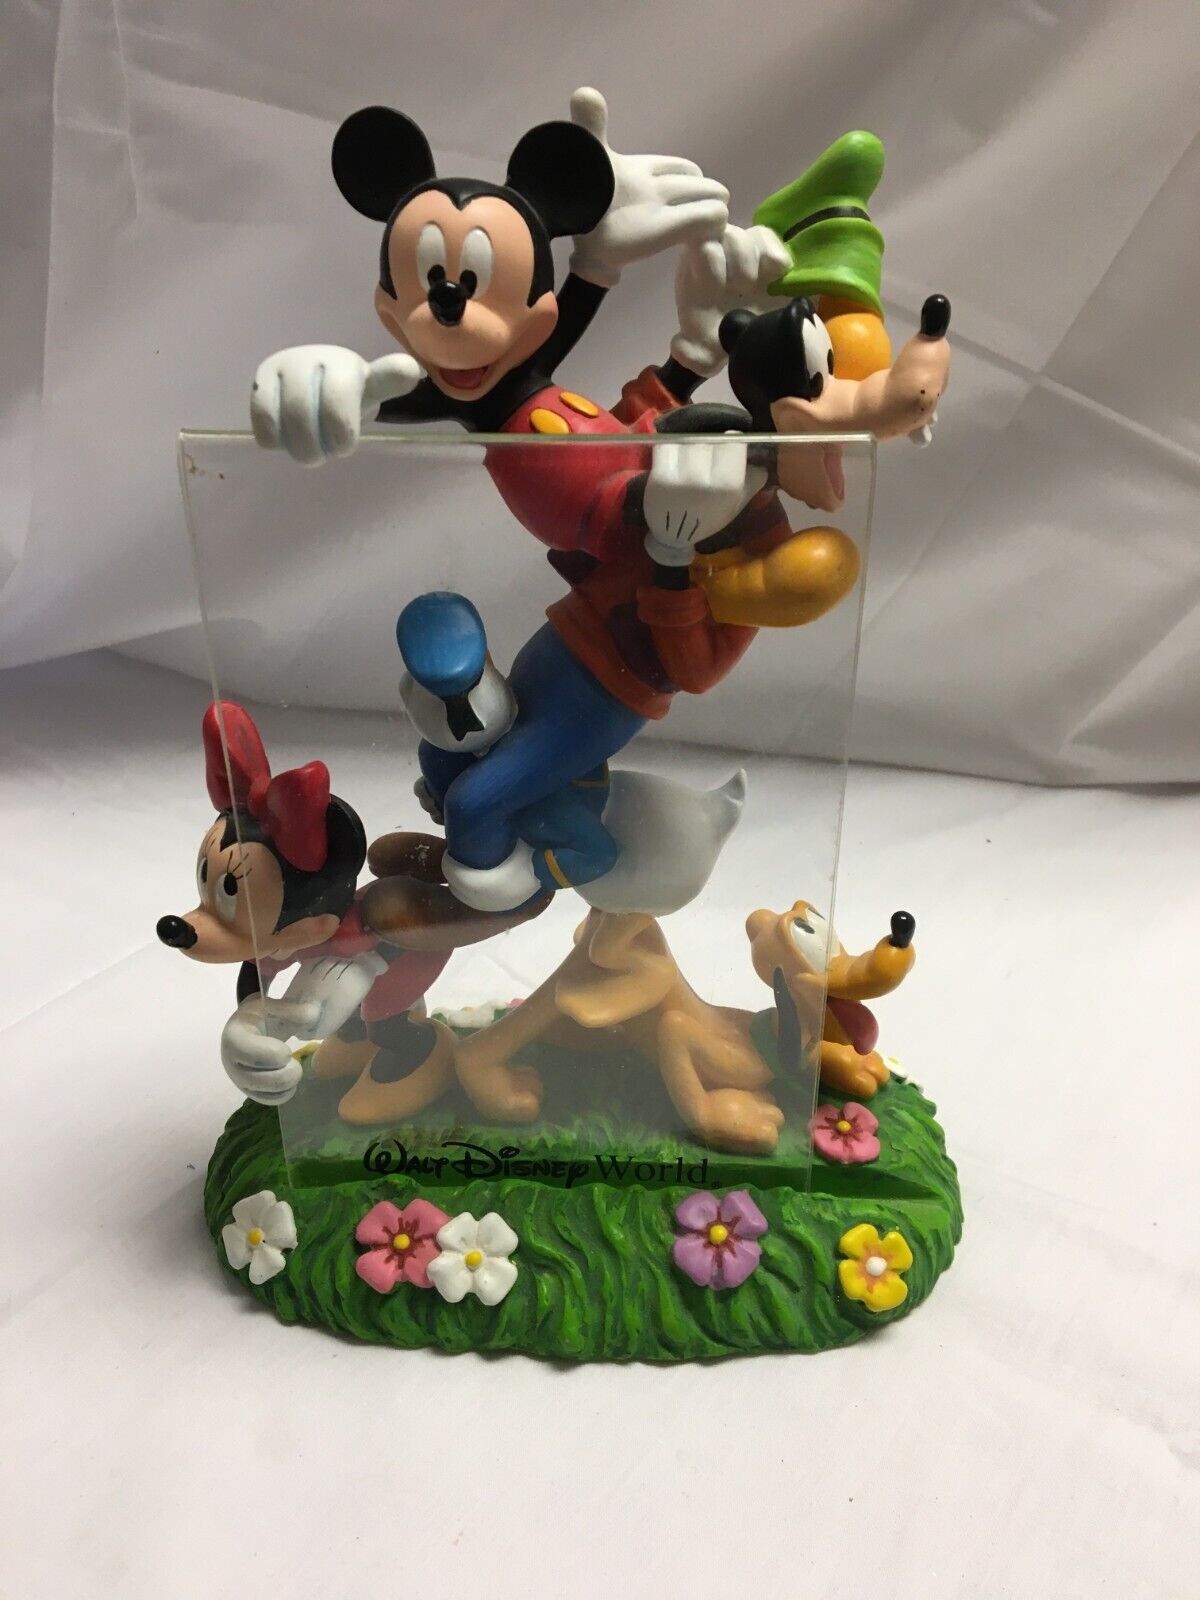 Vintage Disney Resin Goofy Mickey Pluto Character Photo Holder AS IS READ